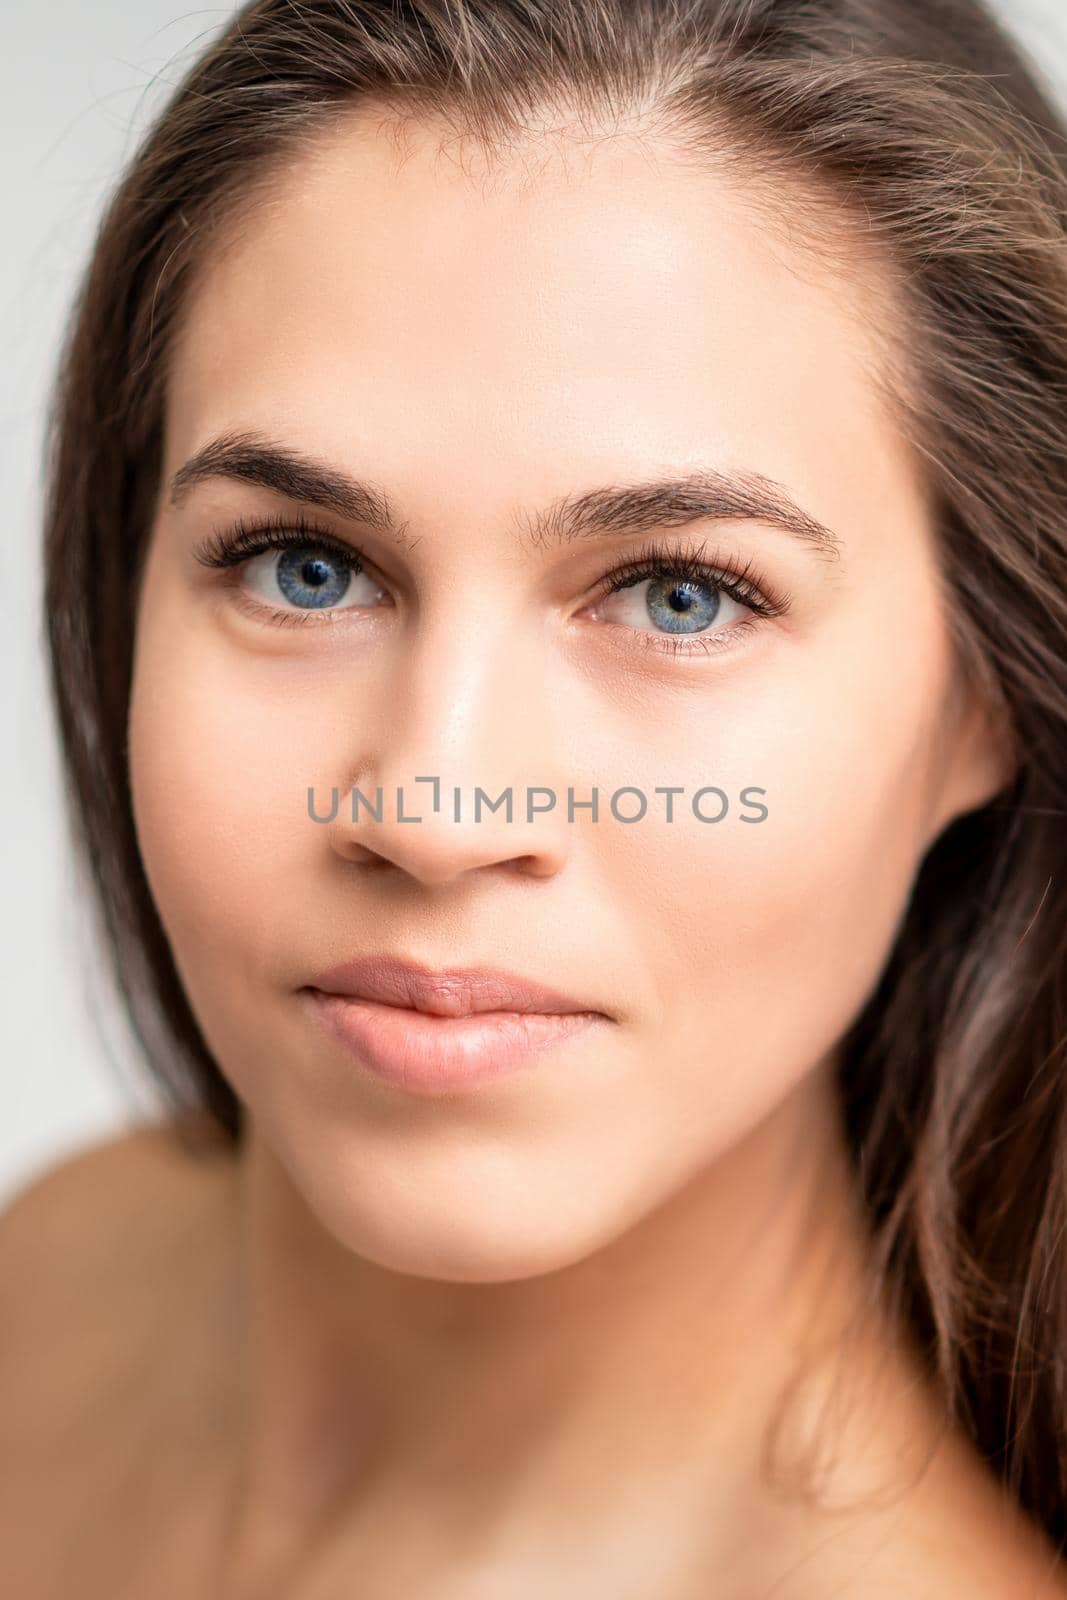 Face portrait of young caucasian woman with natural make up and eyelash extensions looking at camera on white background